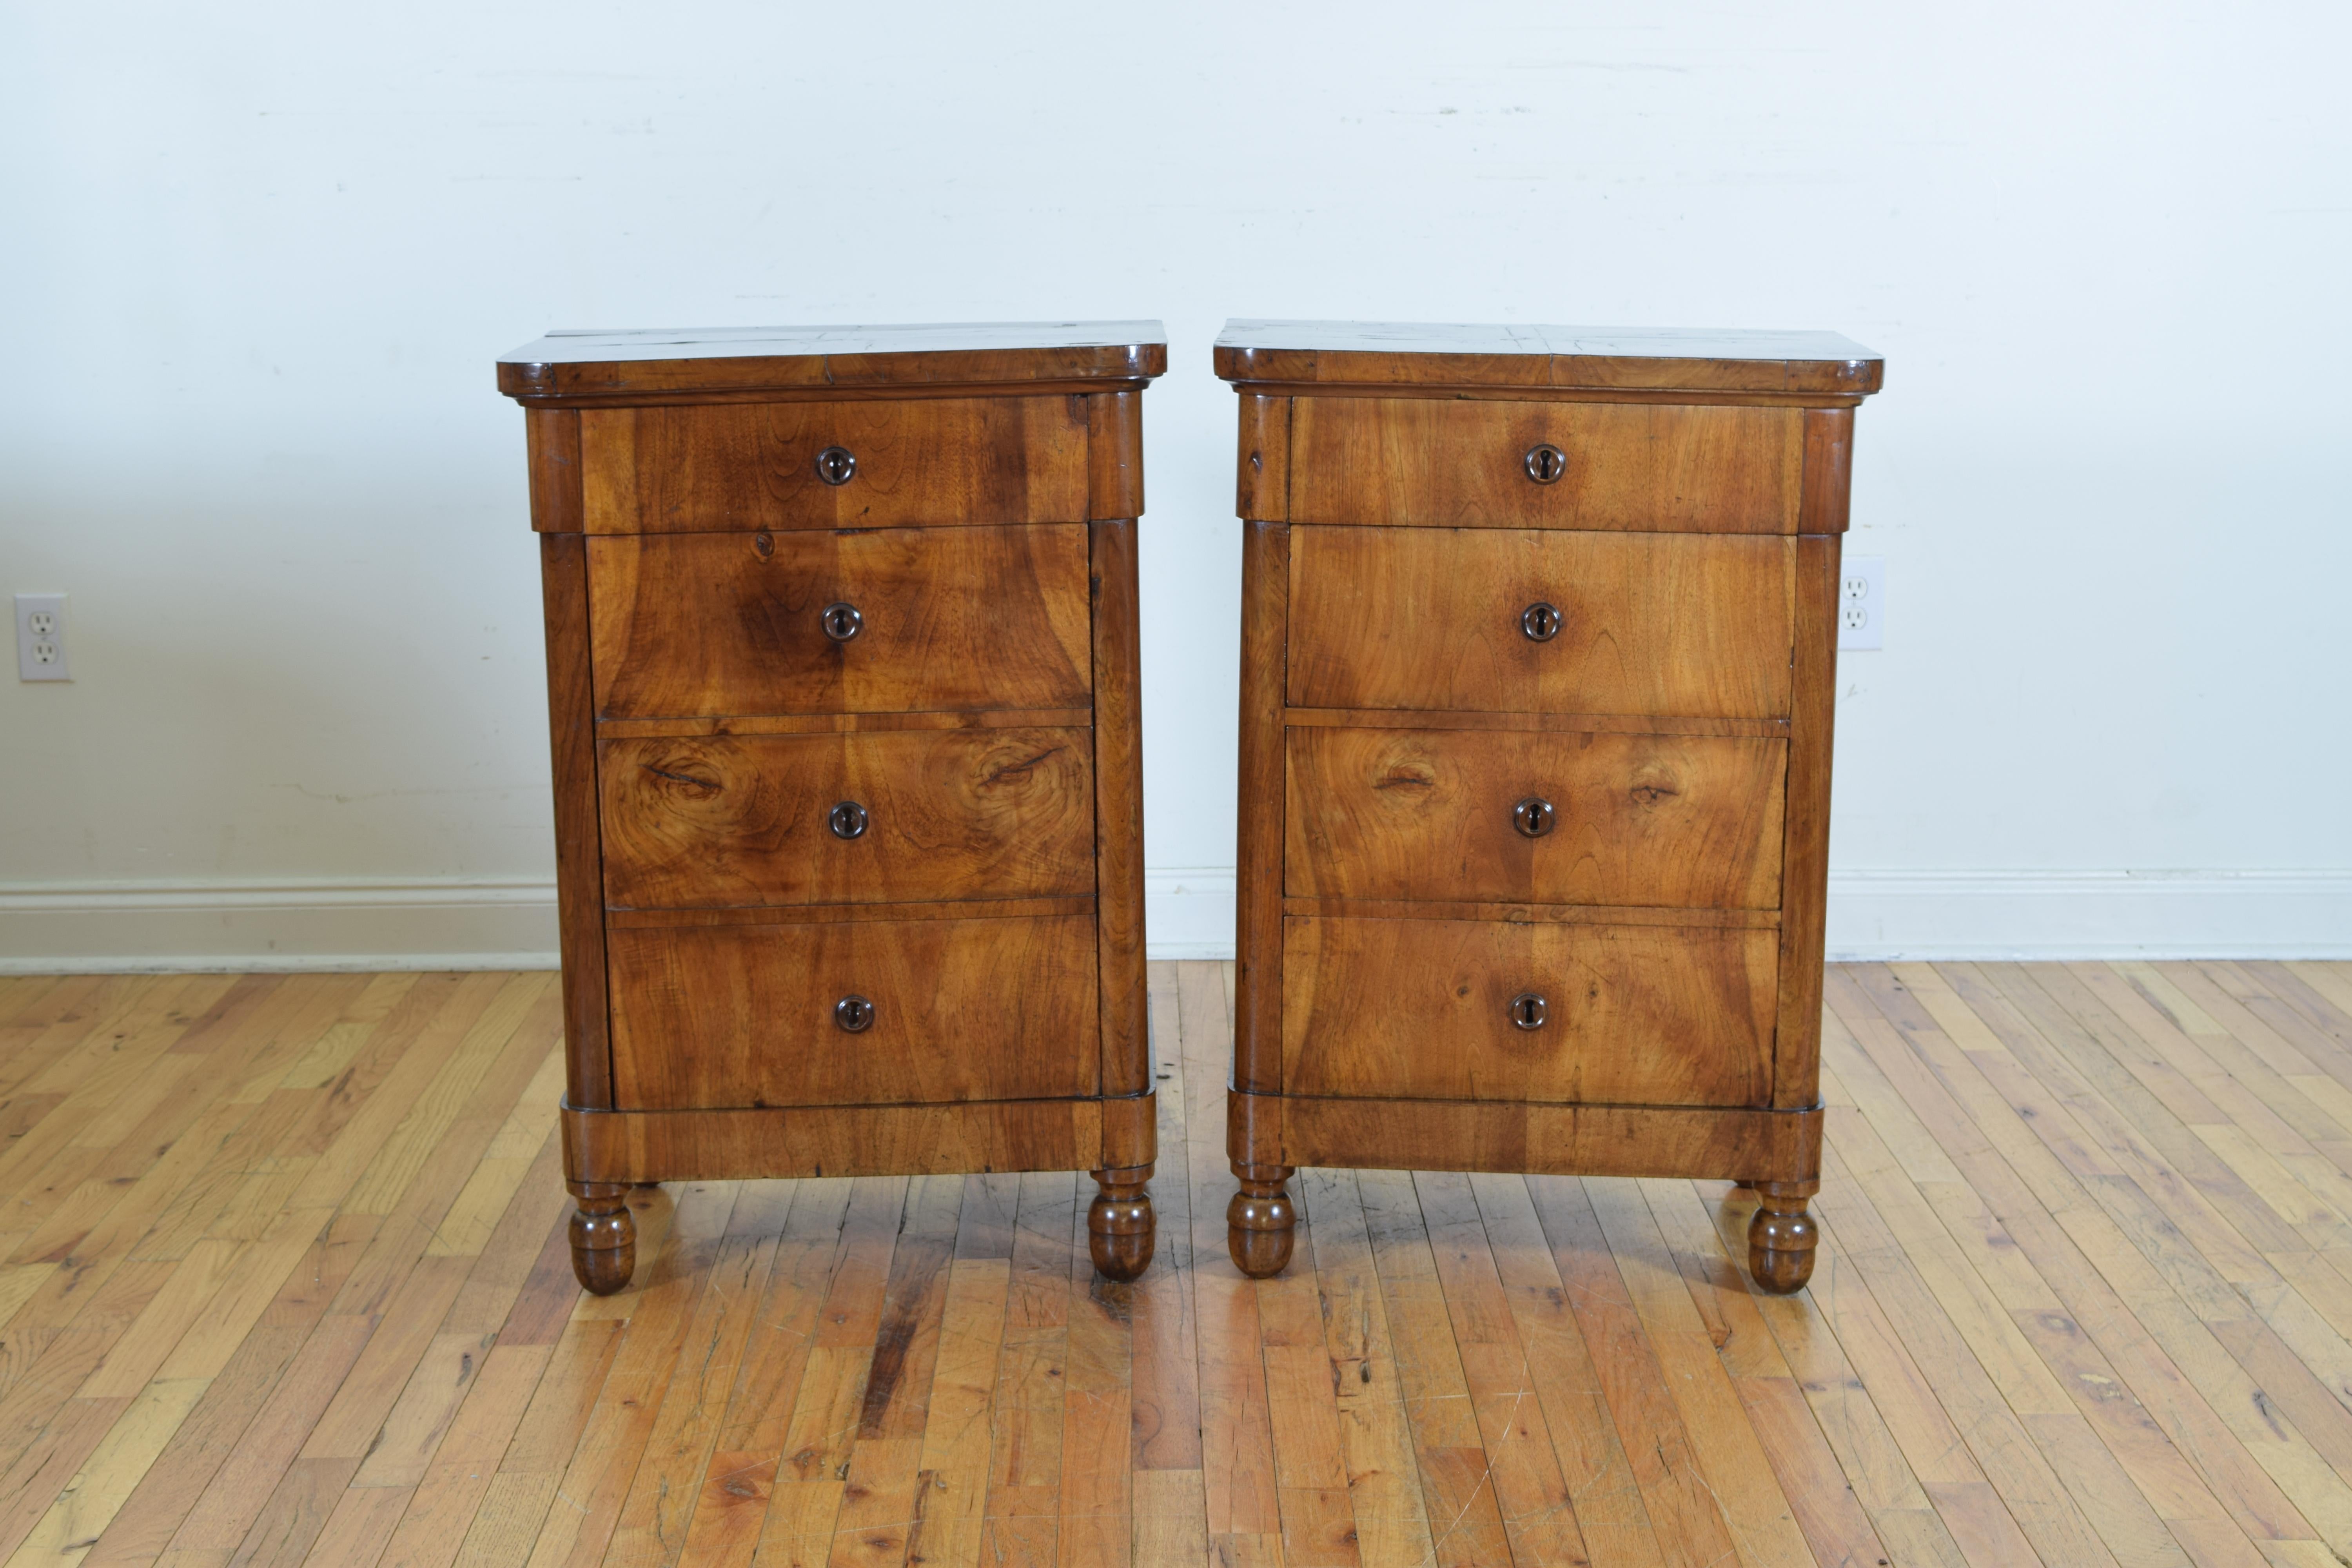 covered entirely in matched grain walnut veneers with solid walnut feet, having rectangular top with rounded front corners above conforming cases, one commode having four drawers the other with a hinged top and hinged door, acorn shaped feet